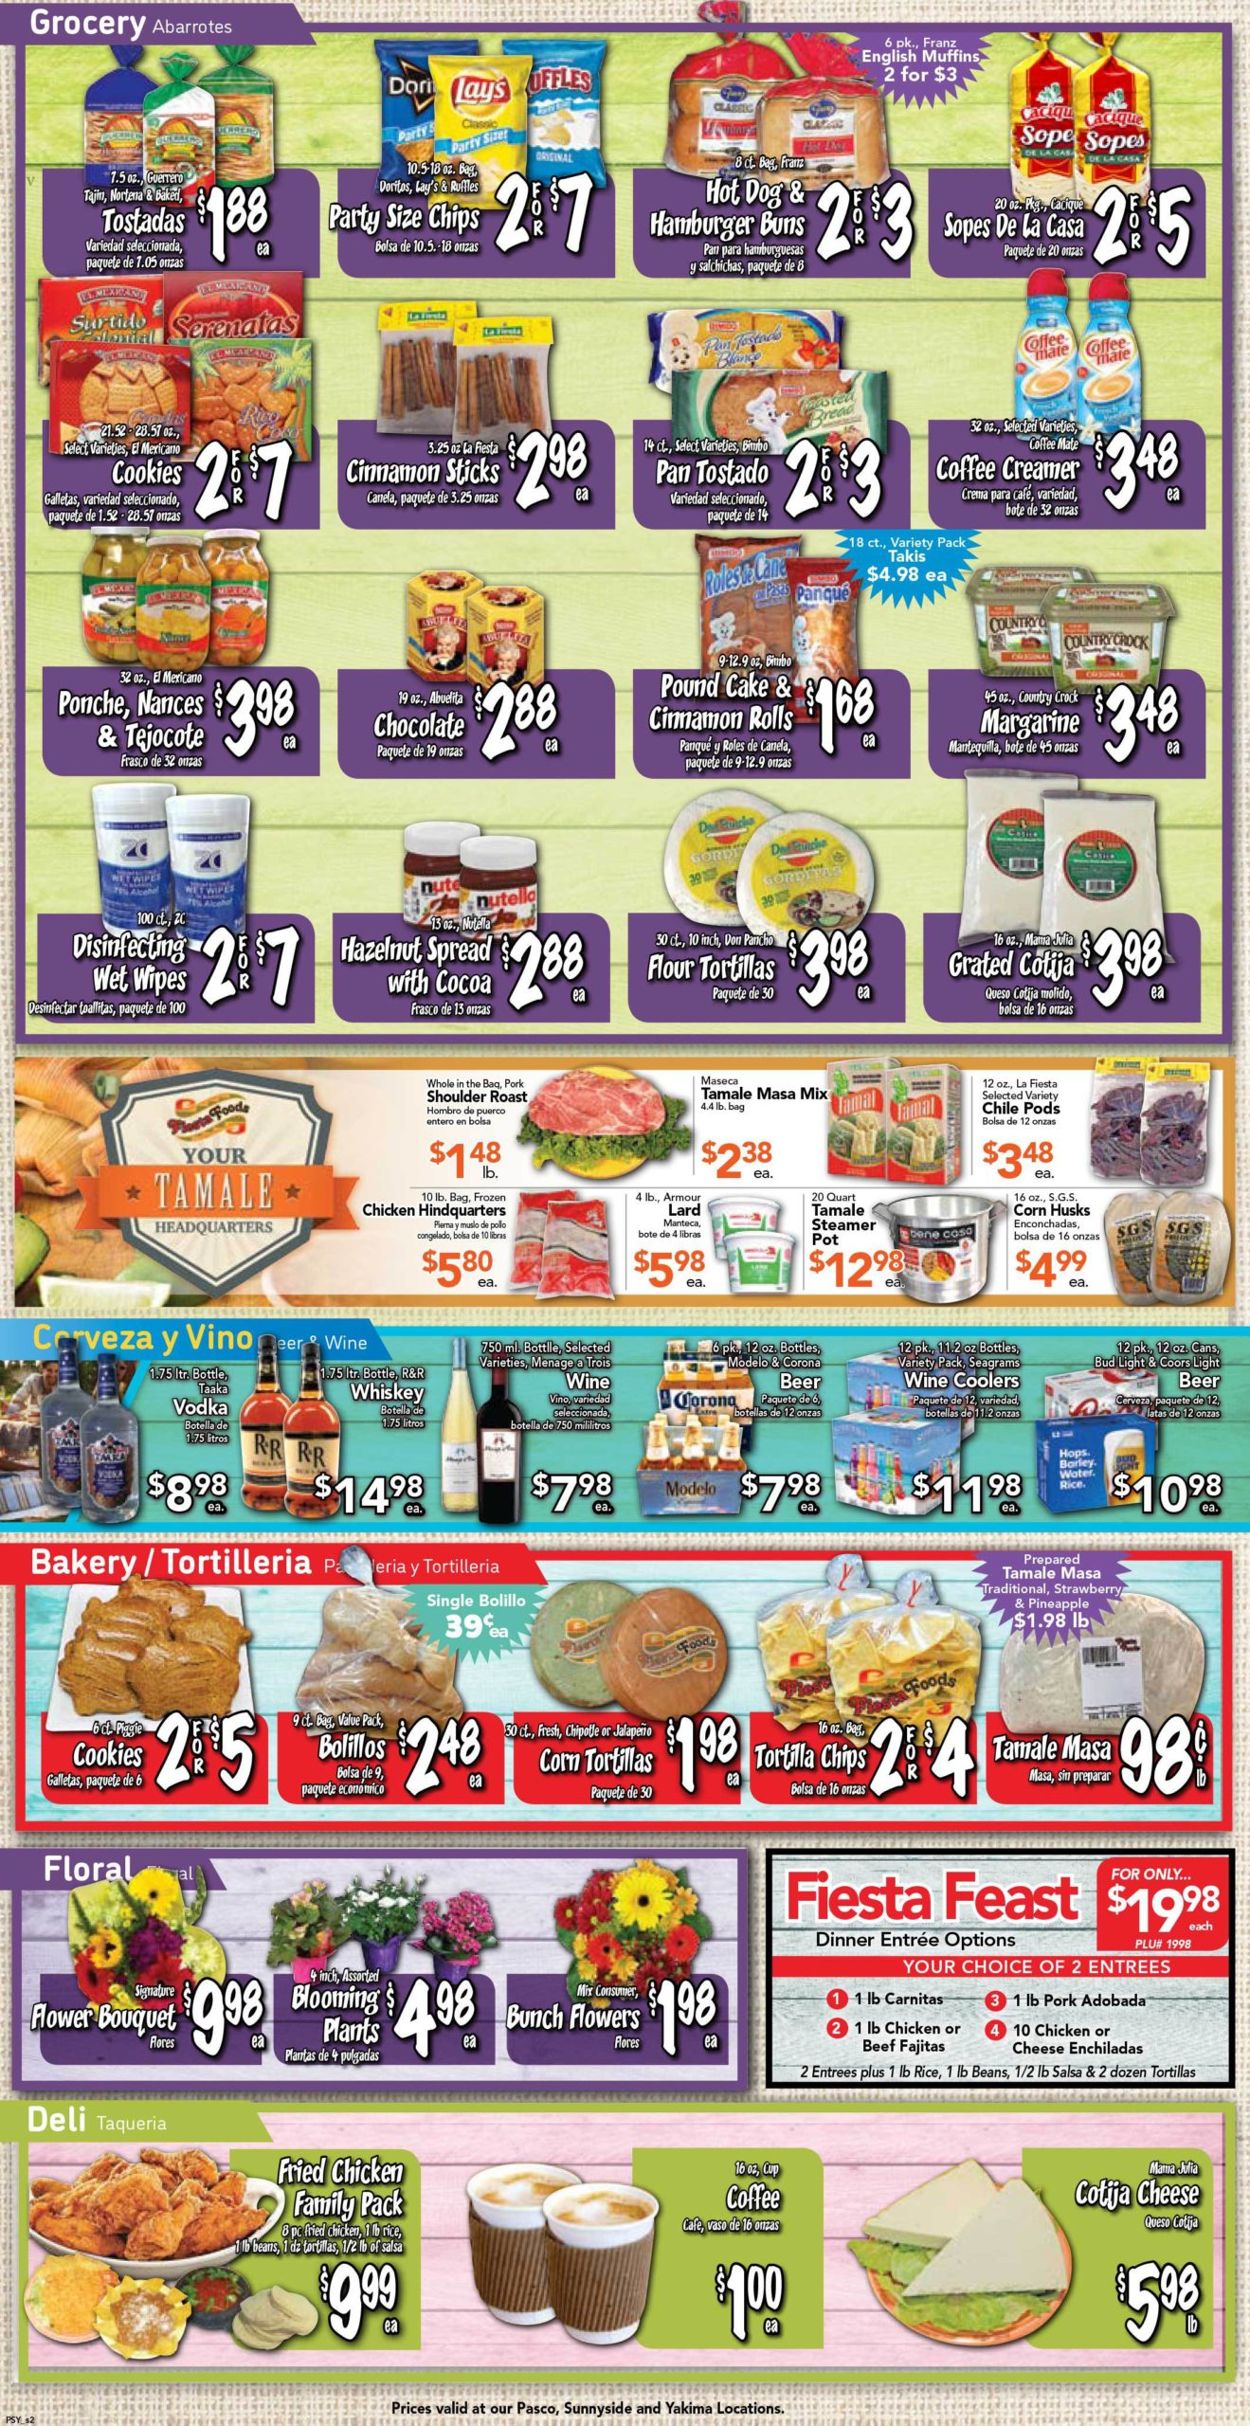 Fiesta Foods SuperMarkets Current weekly ad 11/11 - 11/17/2020 [2 ...